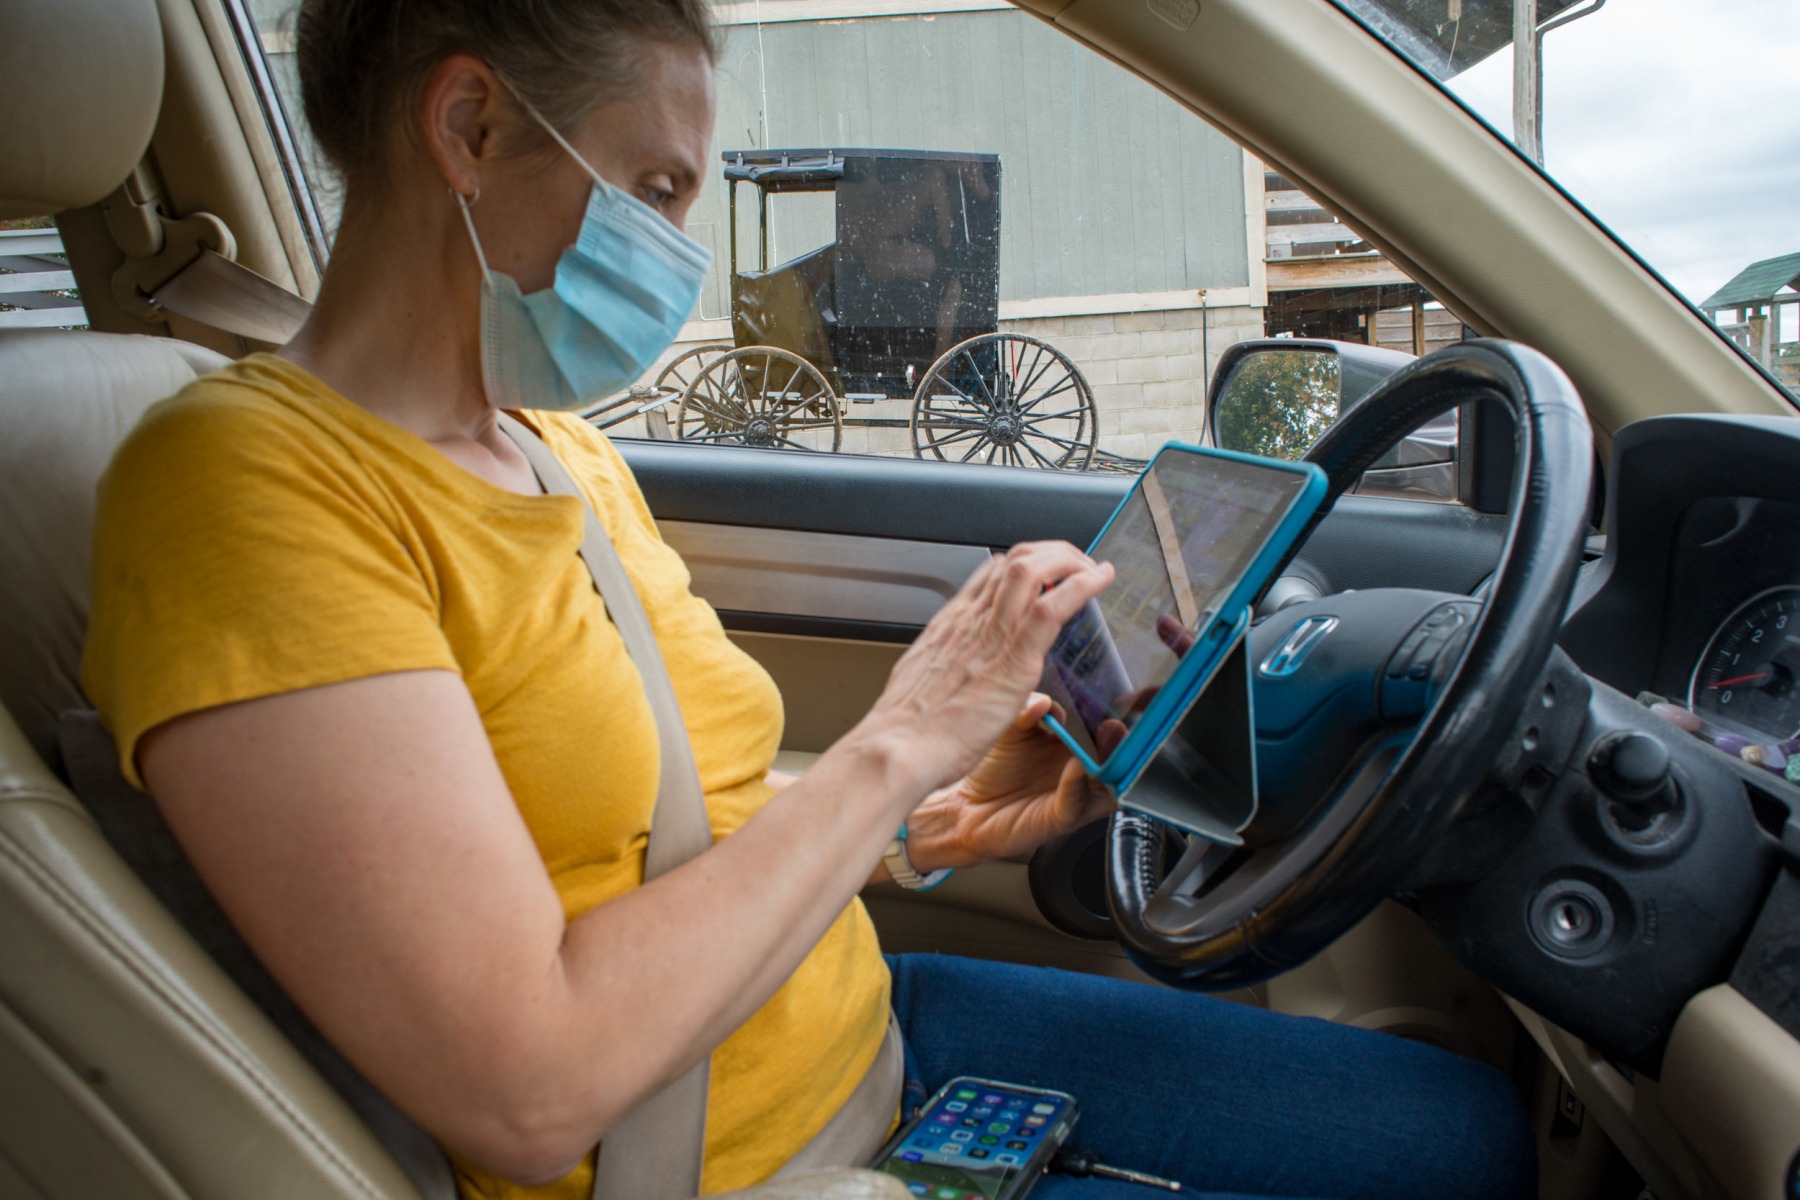 Lauren checks her digital midwife records before going  to  an appointment with an Amish client in Hamden, Ohio. Lauren works with clients living within a sixty-mile radius of Athens, and about half of her clients are from the Amish communities in Vinton, Athens, and Morgan Counties.